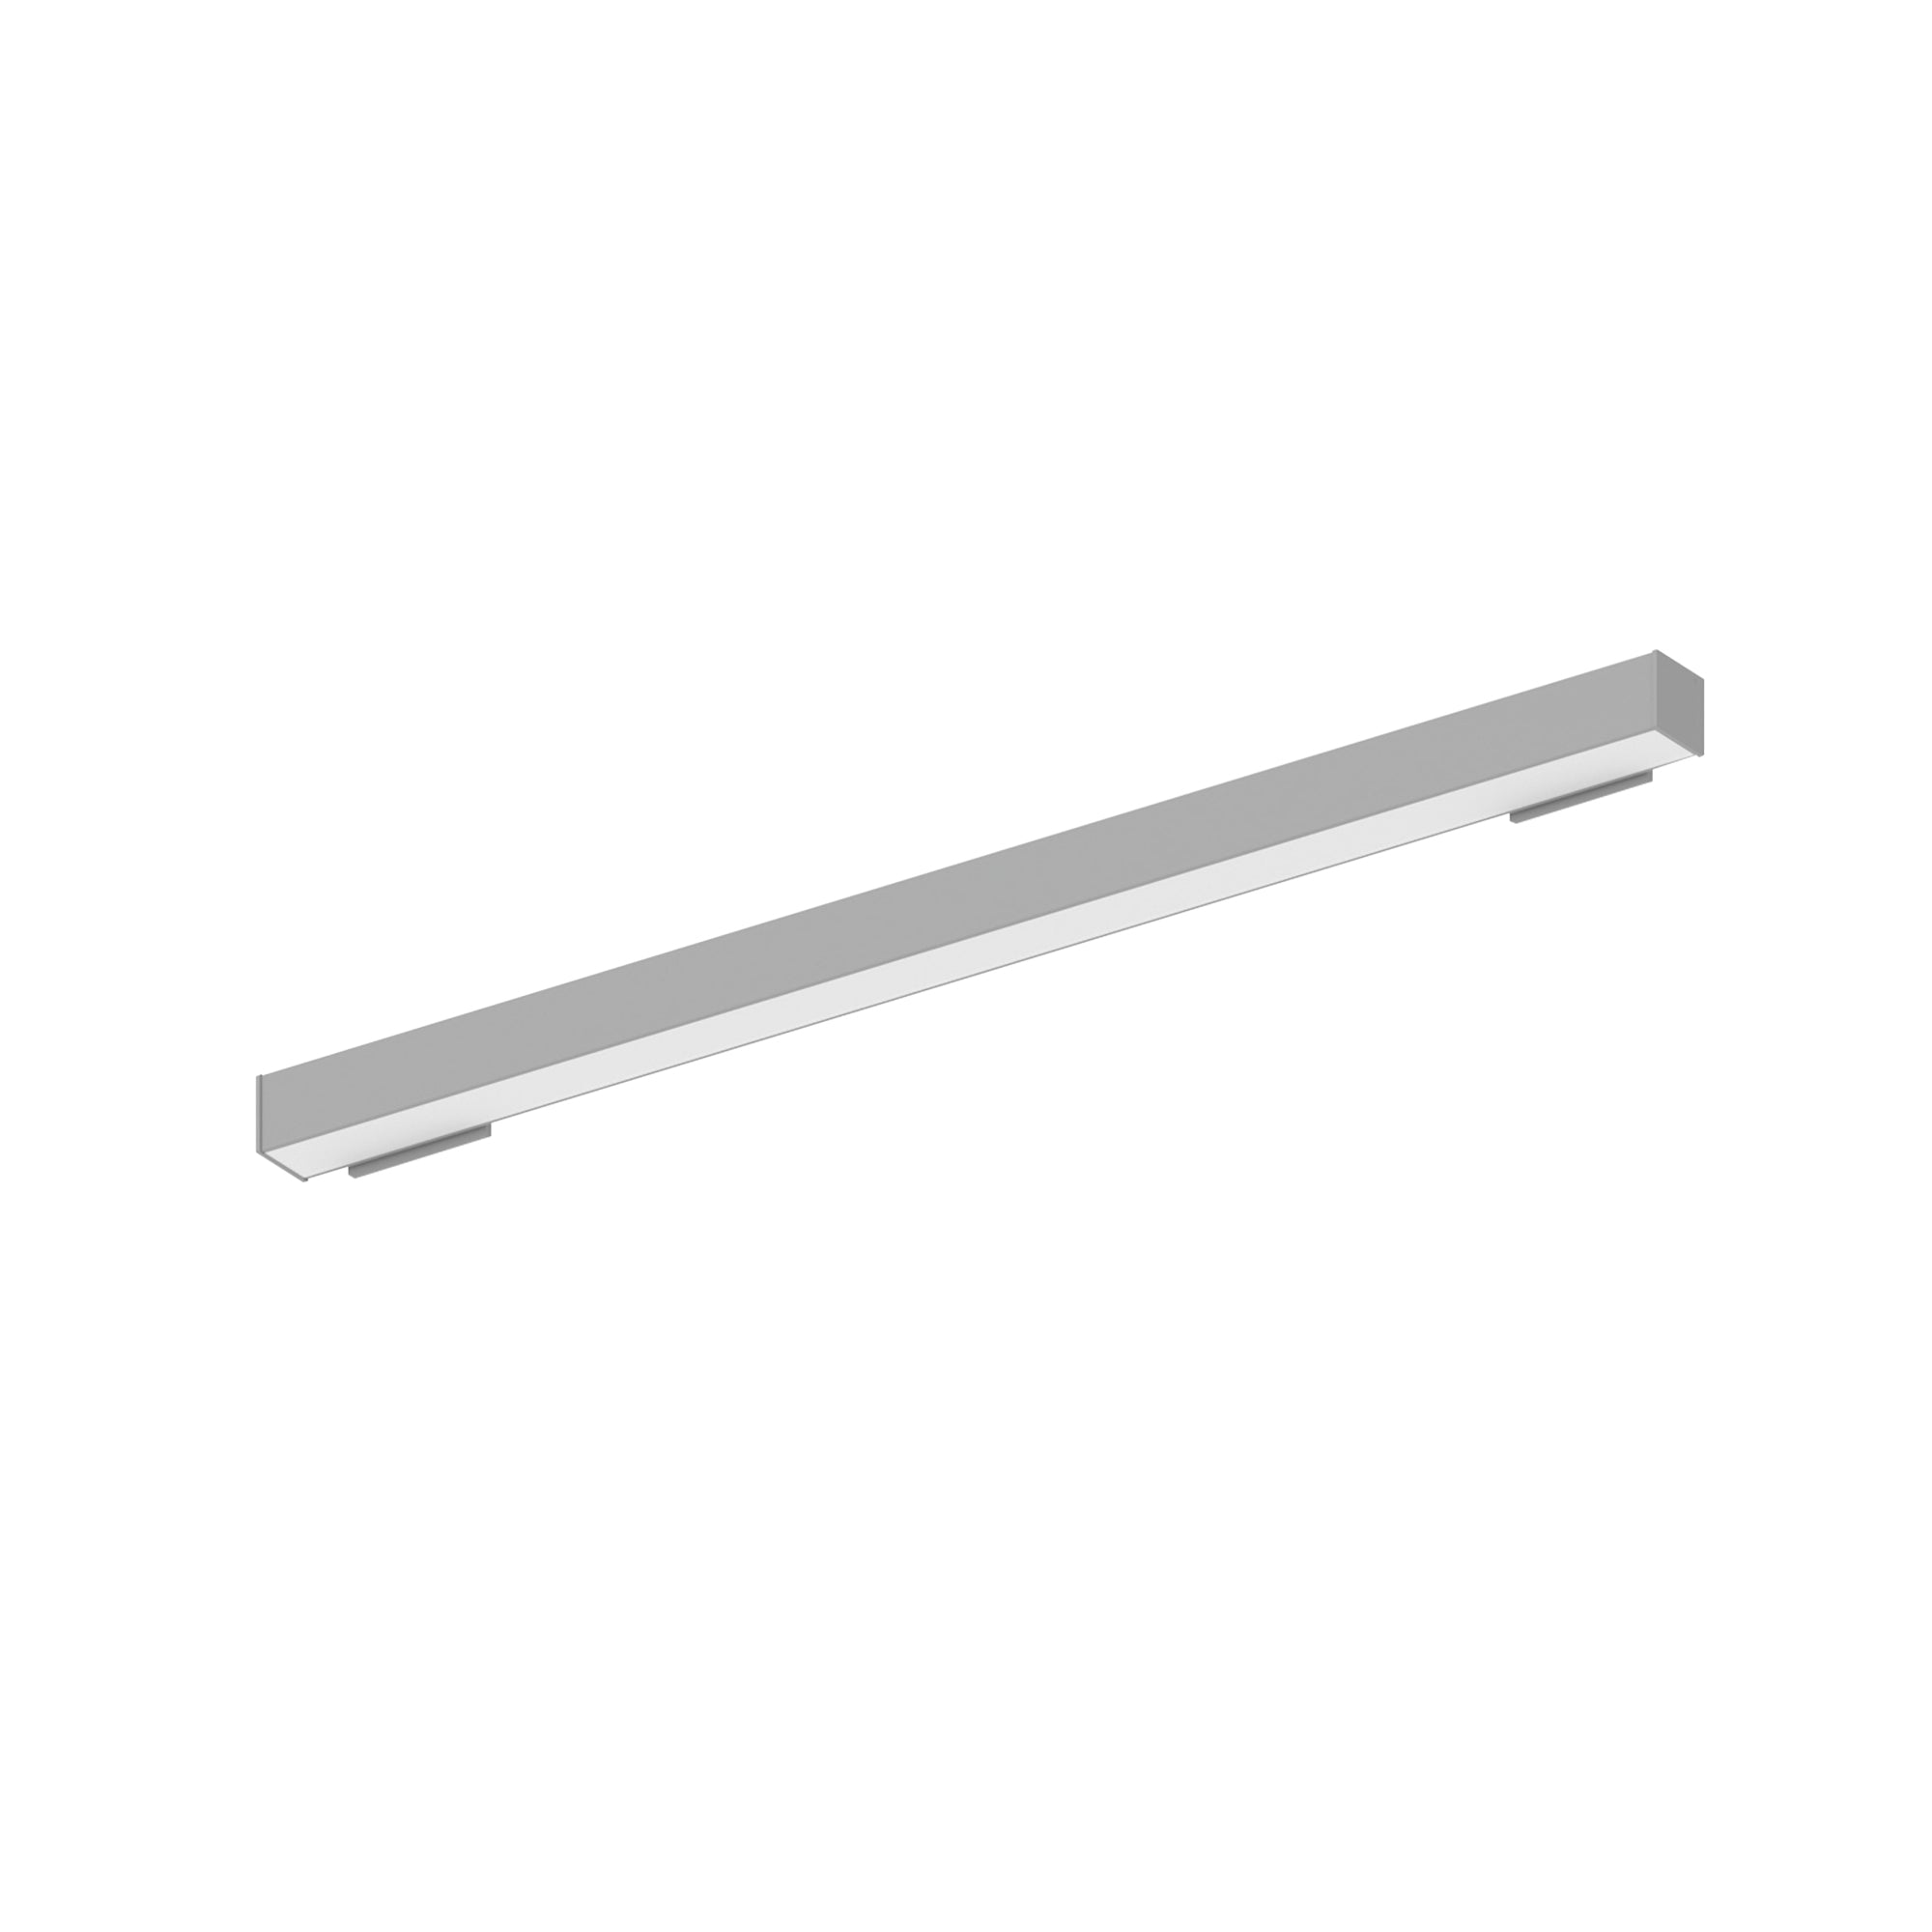 Nora Lighting NWLIN-41040A/L2-R2 - Linear - 4' L-Line LED Wall Mount Linear, 4200lm / 4000K, 2 Inchx4 Inch Left Plate & 2 Inchx4 Inch Right Plate, Aluminum Finish